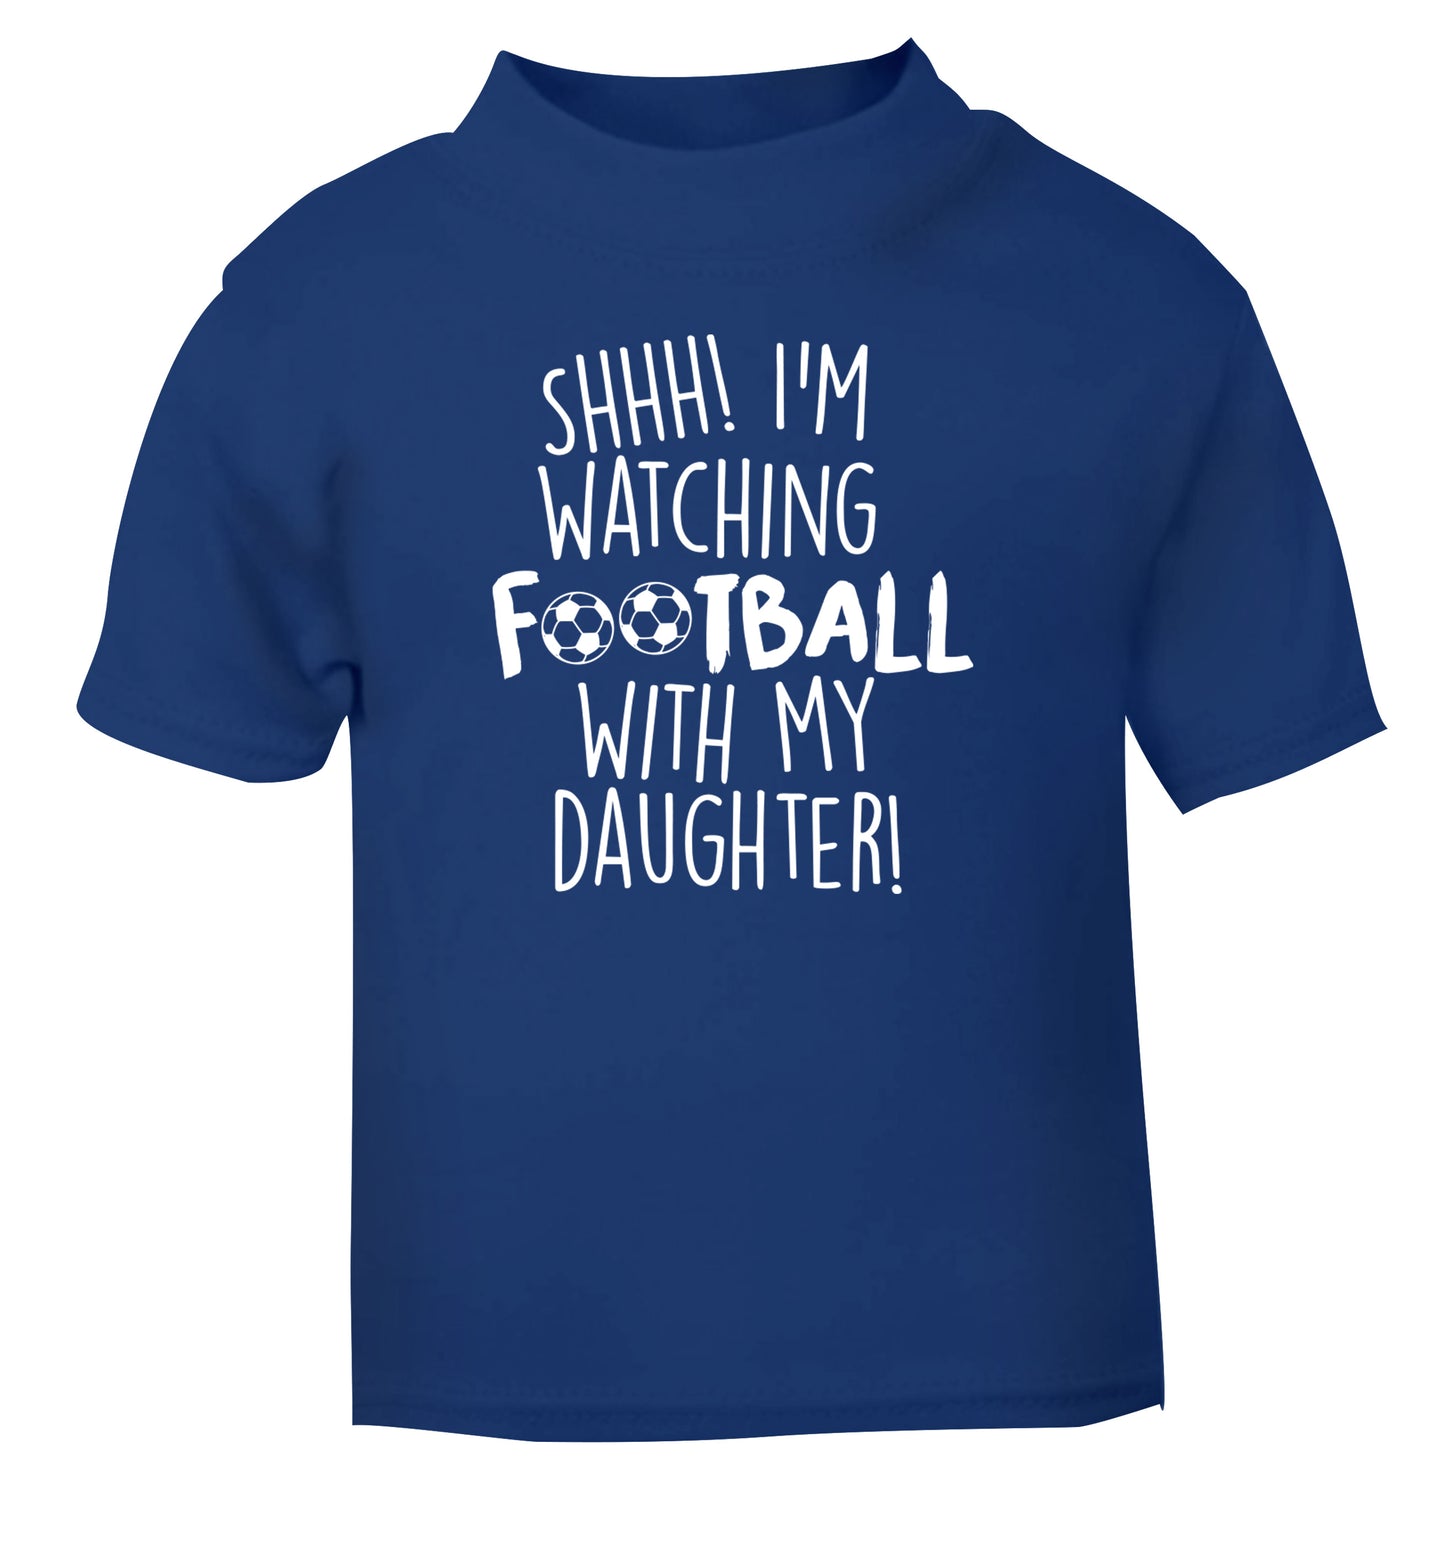 Shhh I'm watching football with my daughter blue Baby Toddler Tshirt 2 Years